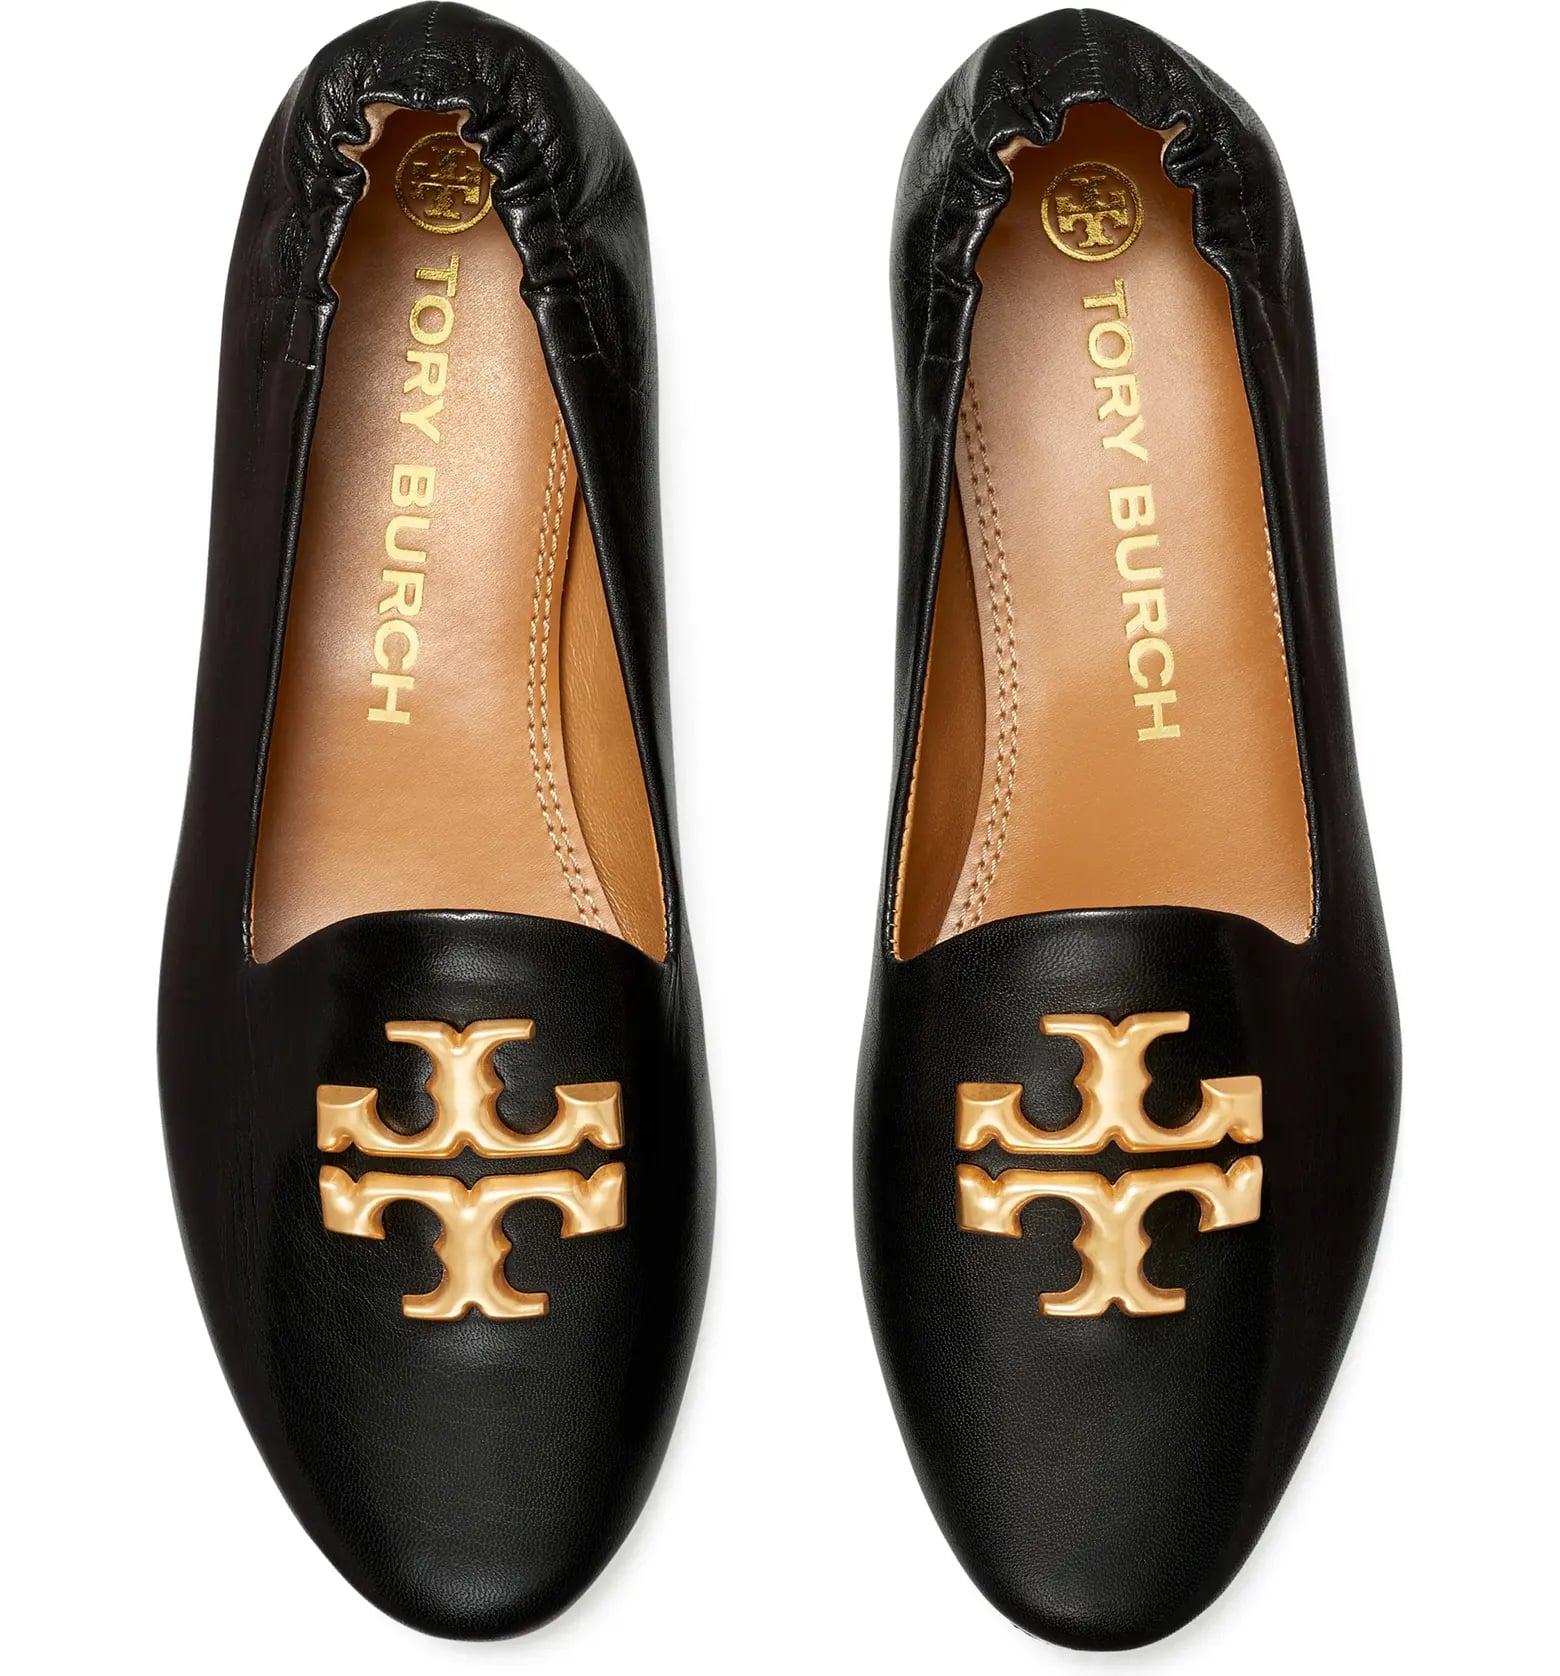 The Best Tory Burch Flat to Buy in 2023? This Hybrid Ballet Loafer